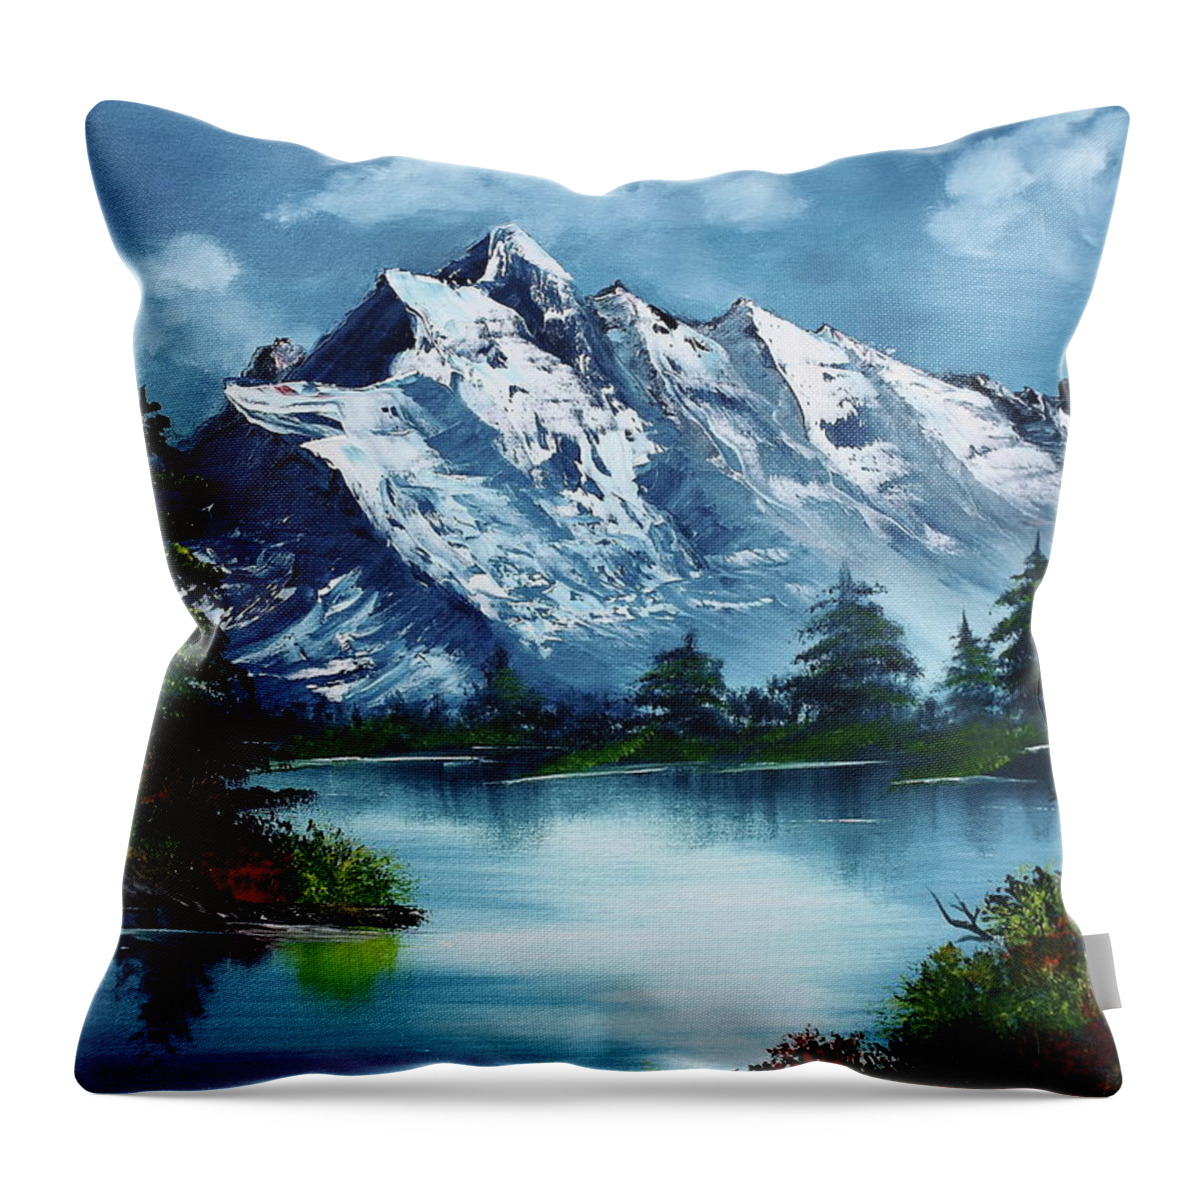  Throw Pillow featuring the painting Take A Breath by Barbara Teller